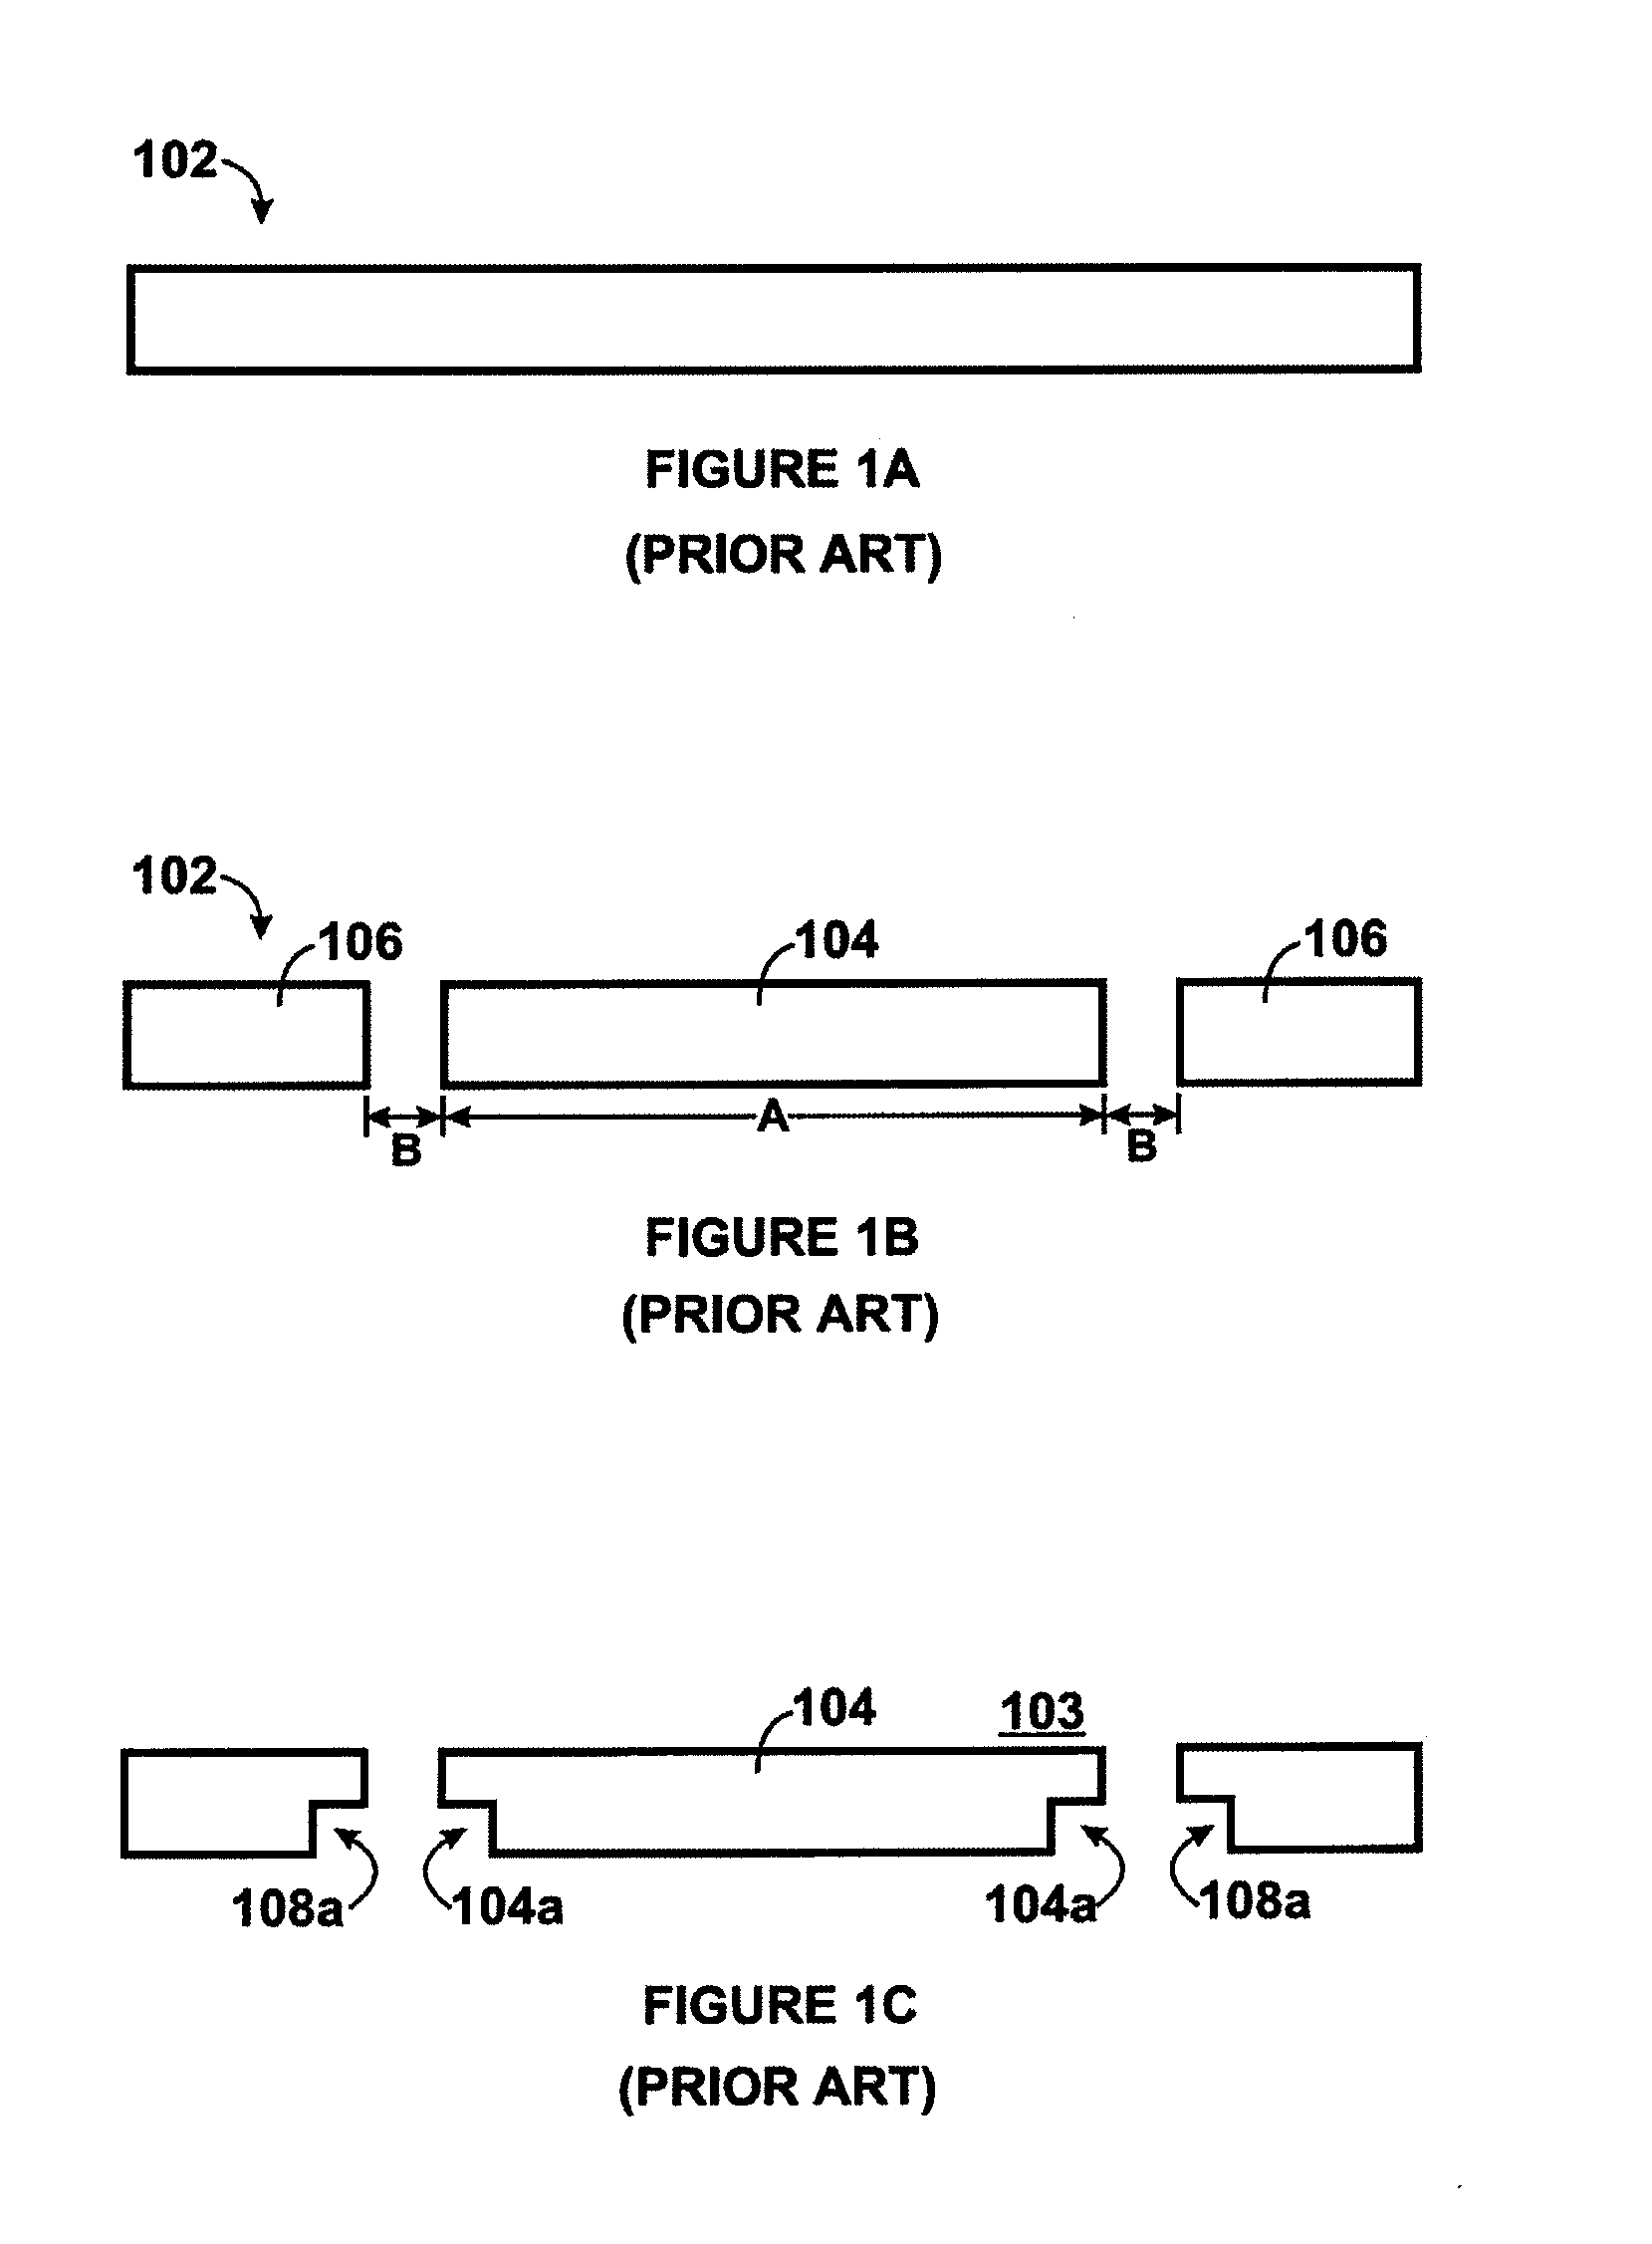 Power semiconductor device packaging